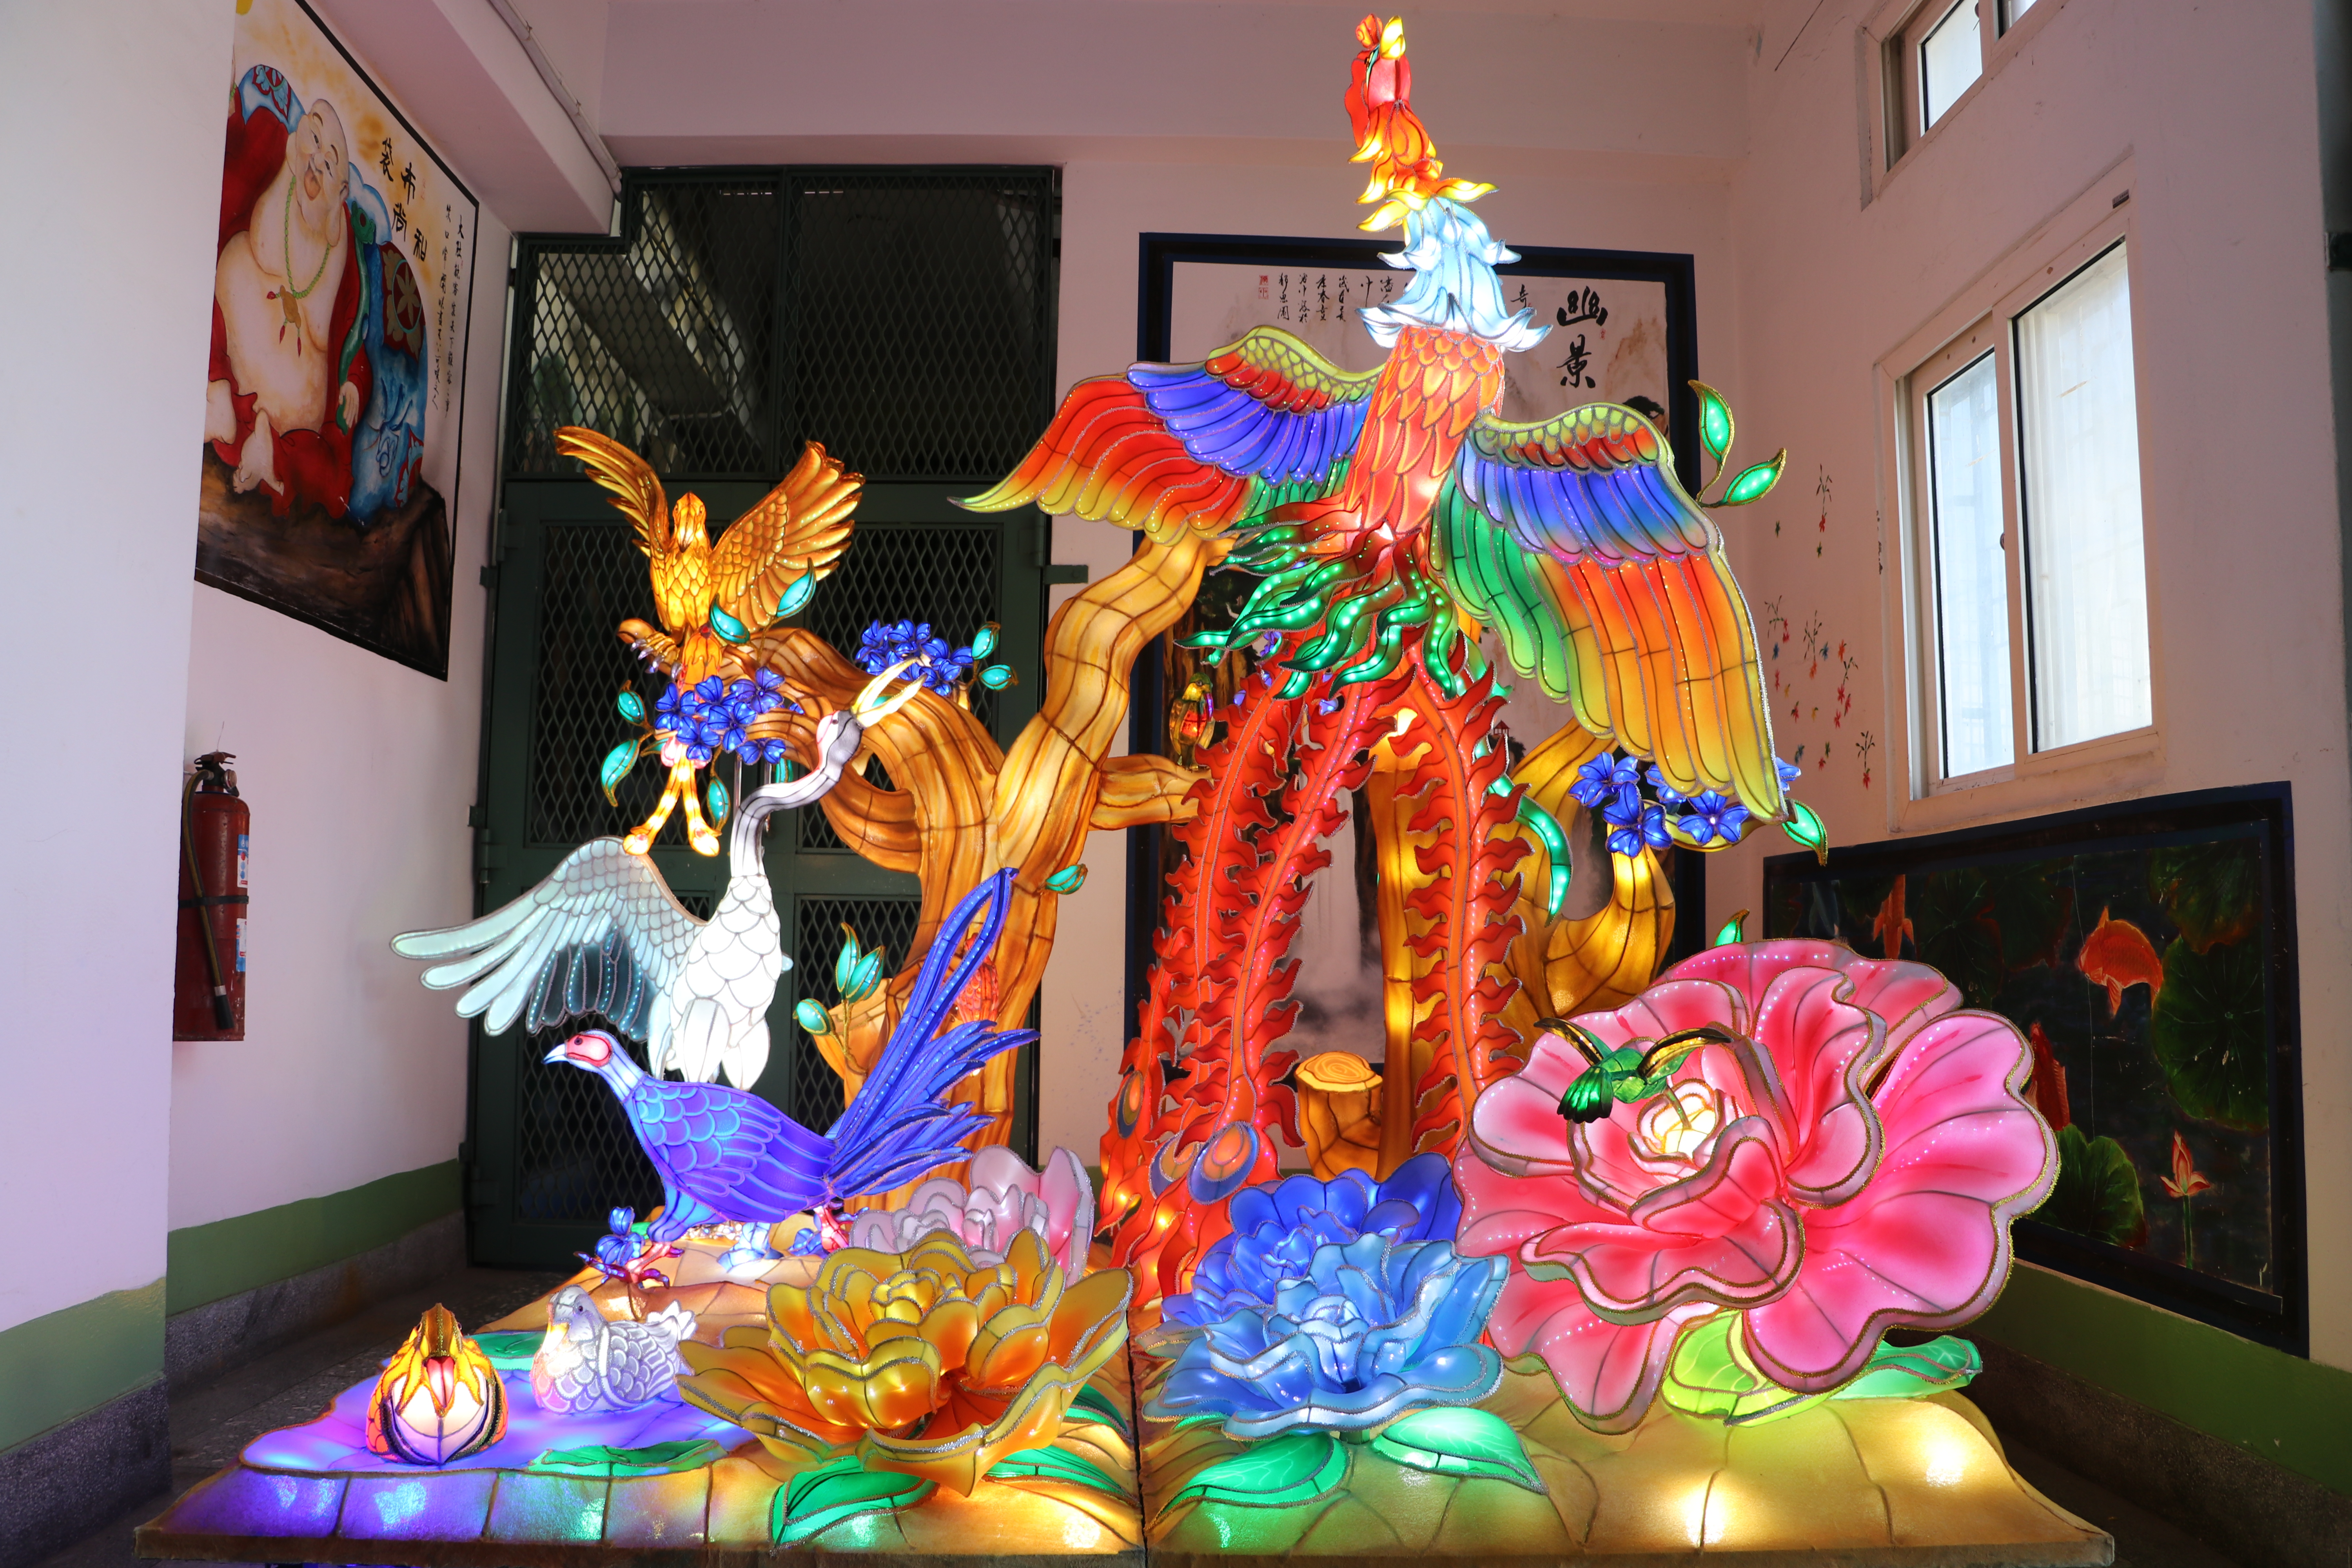 We hold the competition of spring festival environment arrangement.